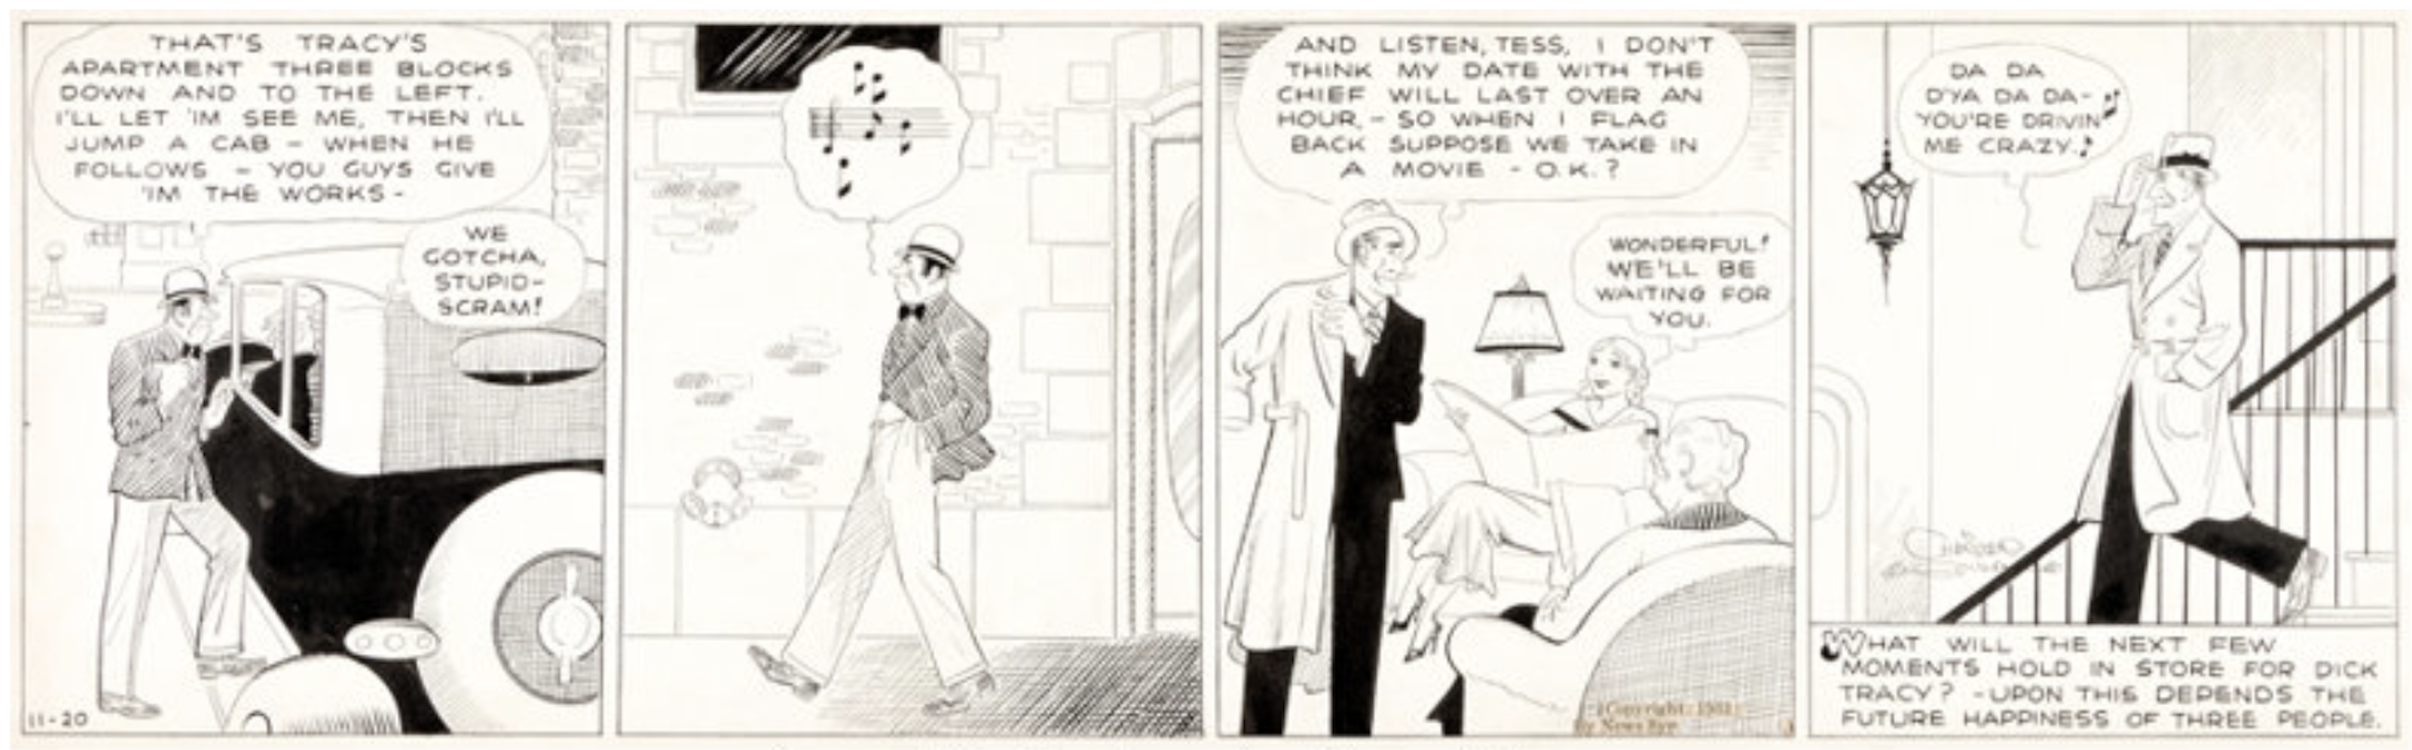 Dick Tracy Daily Comic Strip 11-20-31 by Chester Gould sold for $6,900. Click here to get your original art appraised.